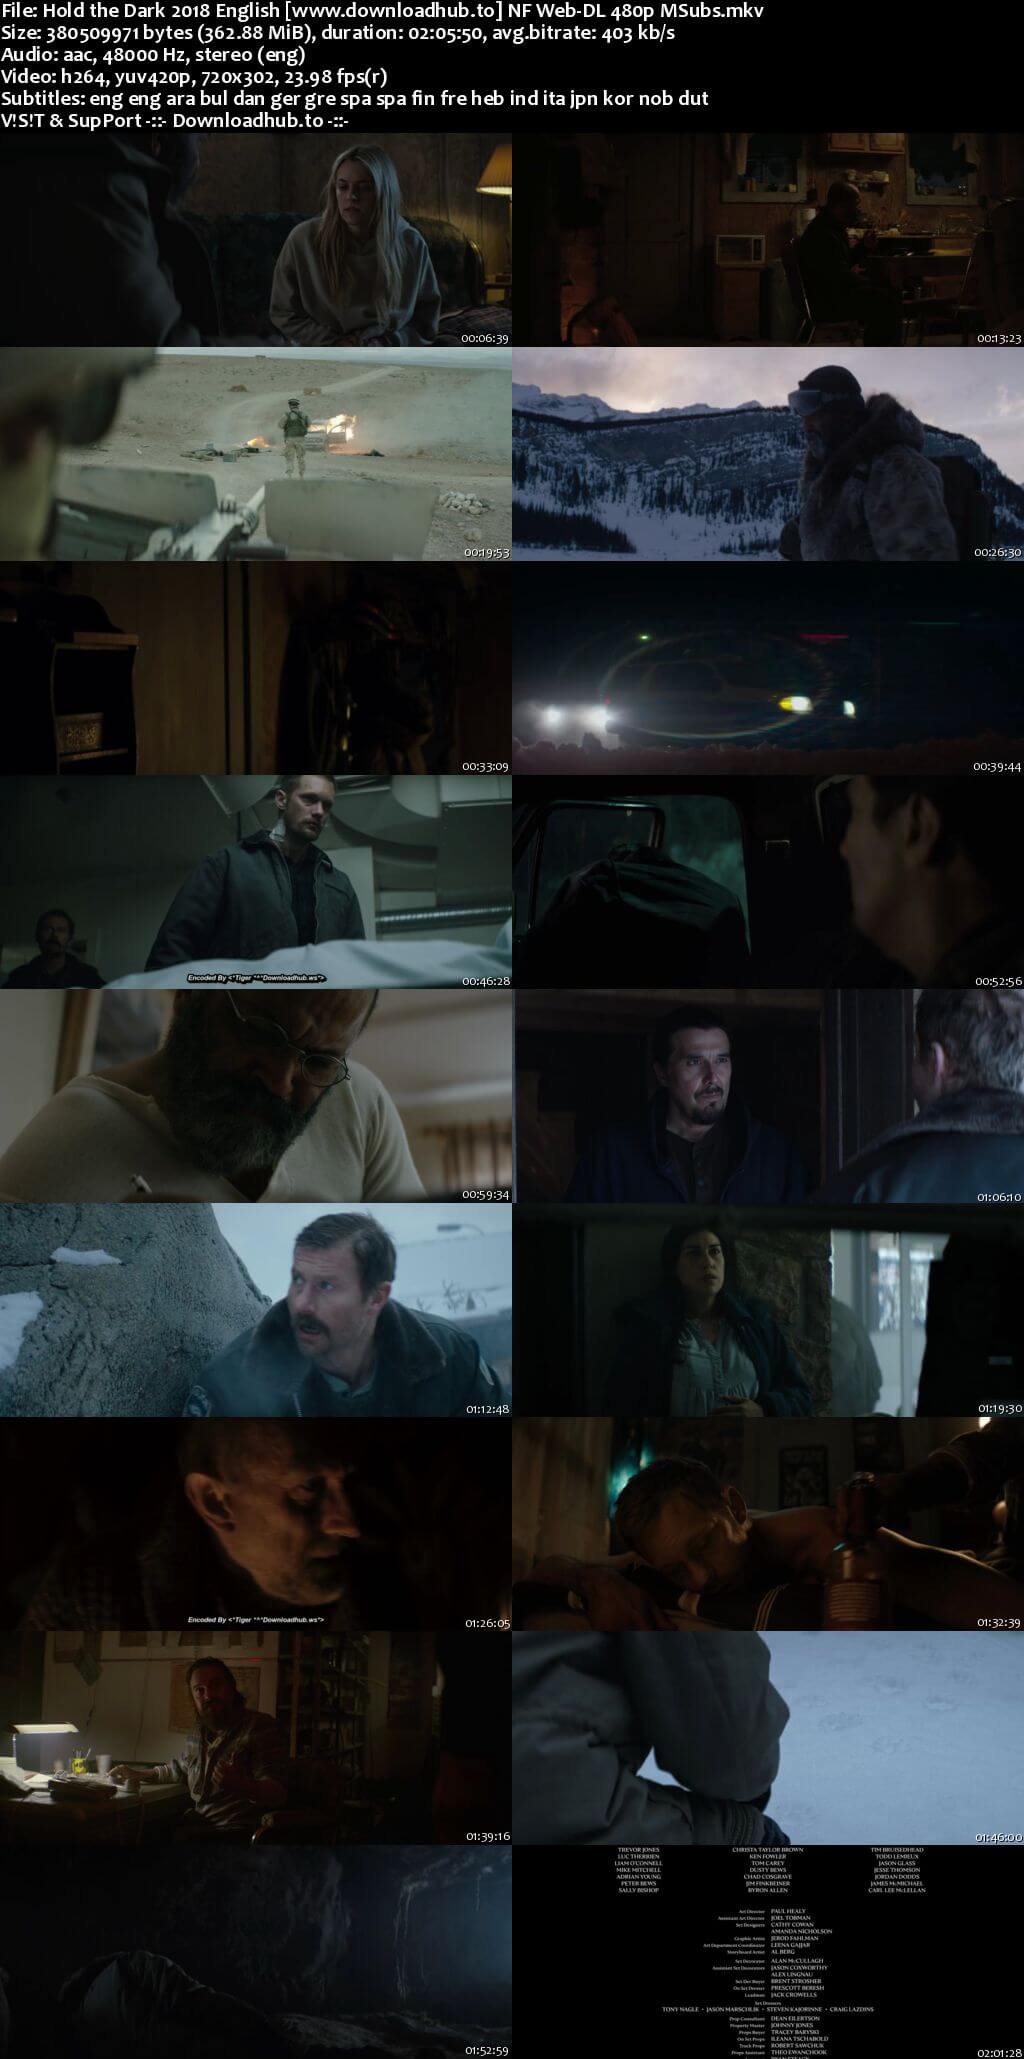 Hold the Dark 2018 English 350MB NF Web-DL 480p MSubs